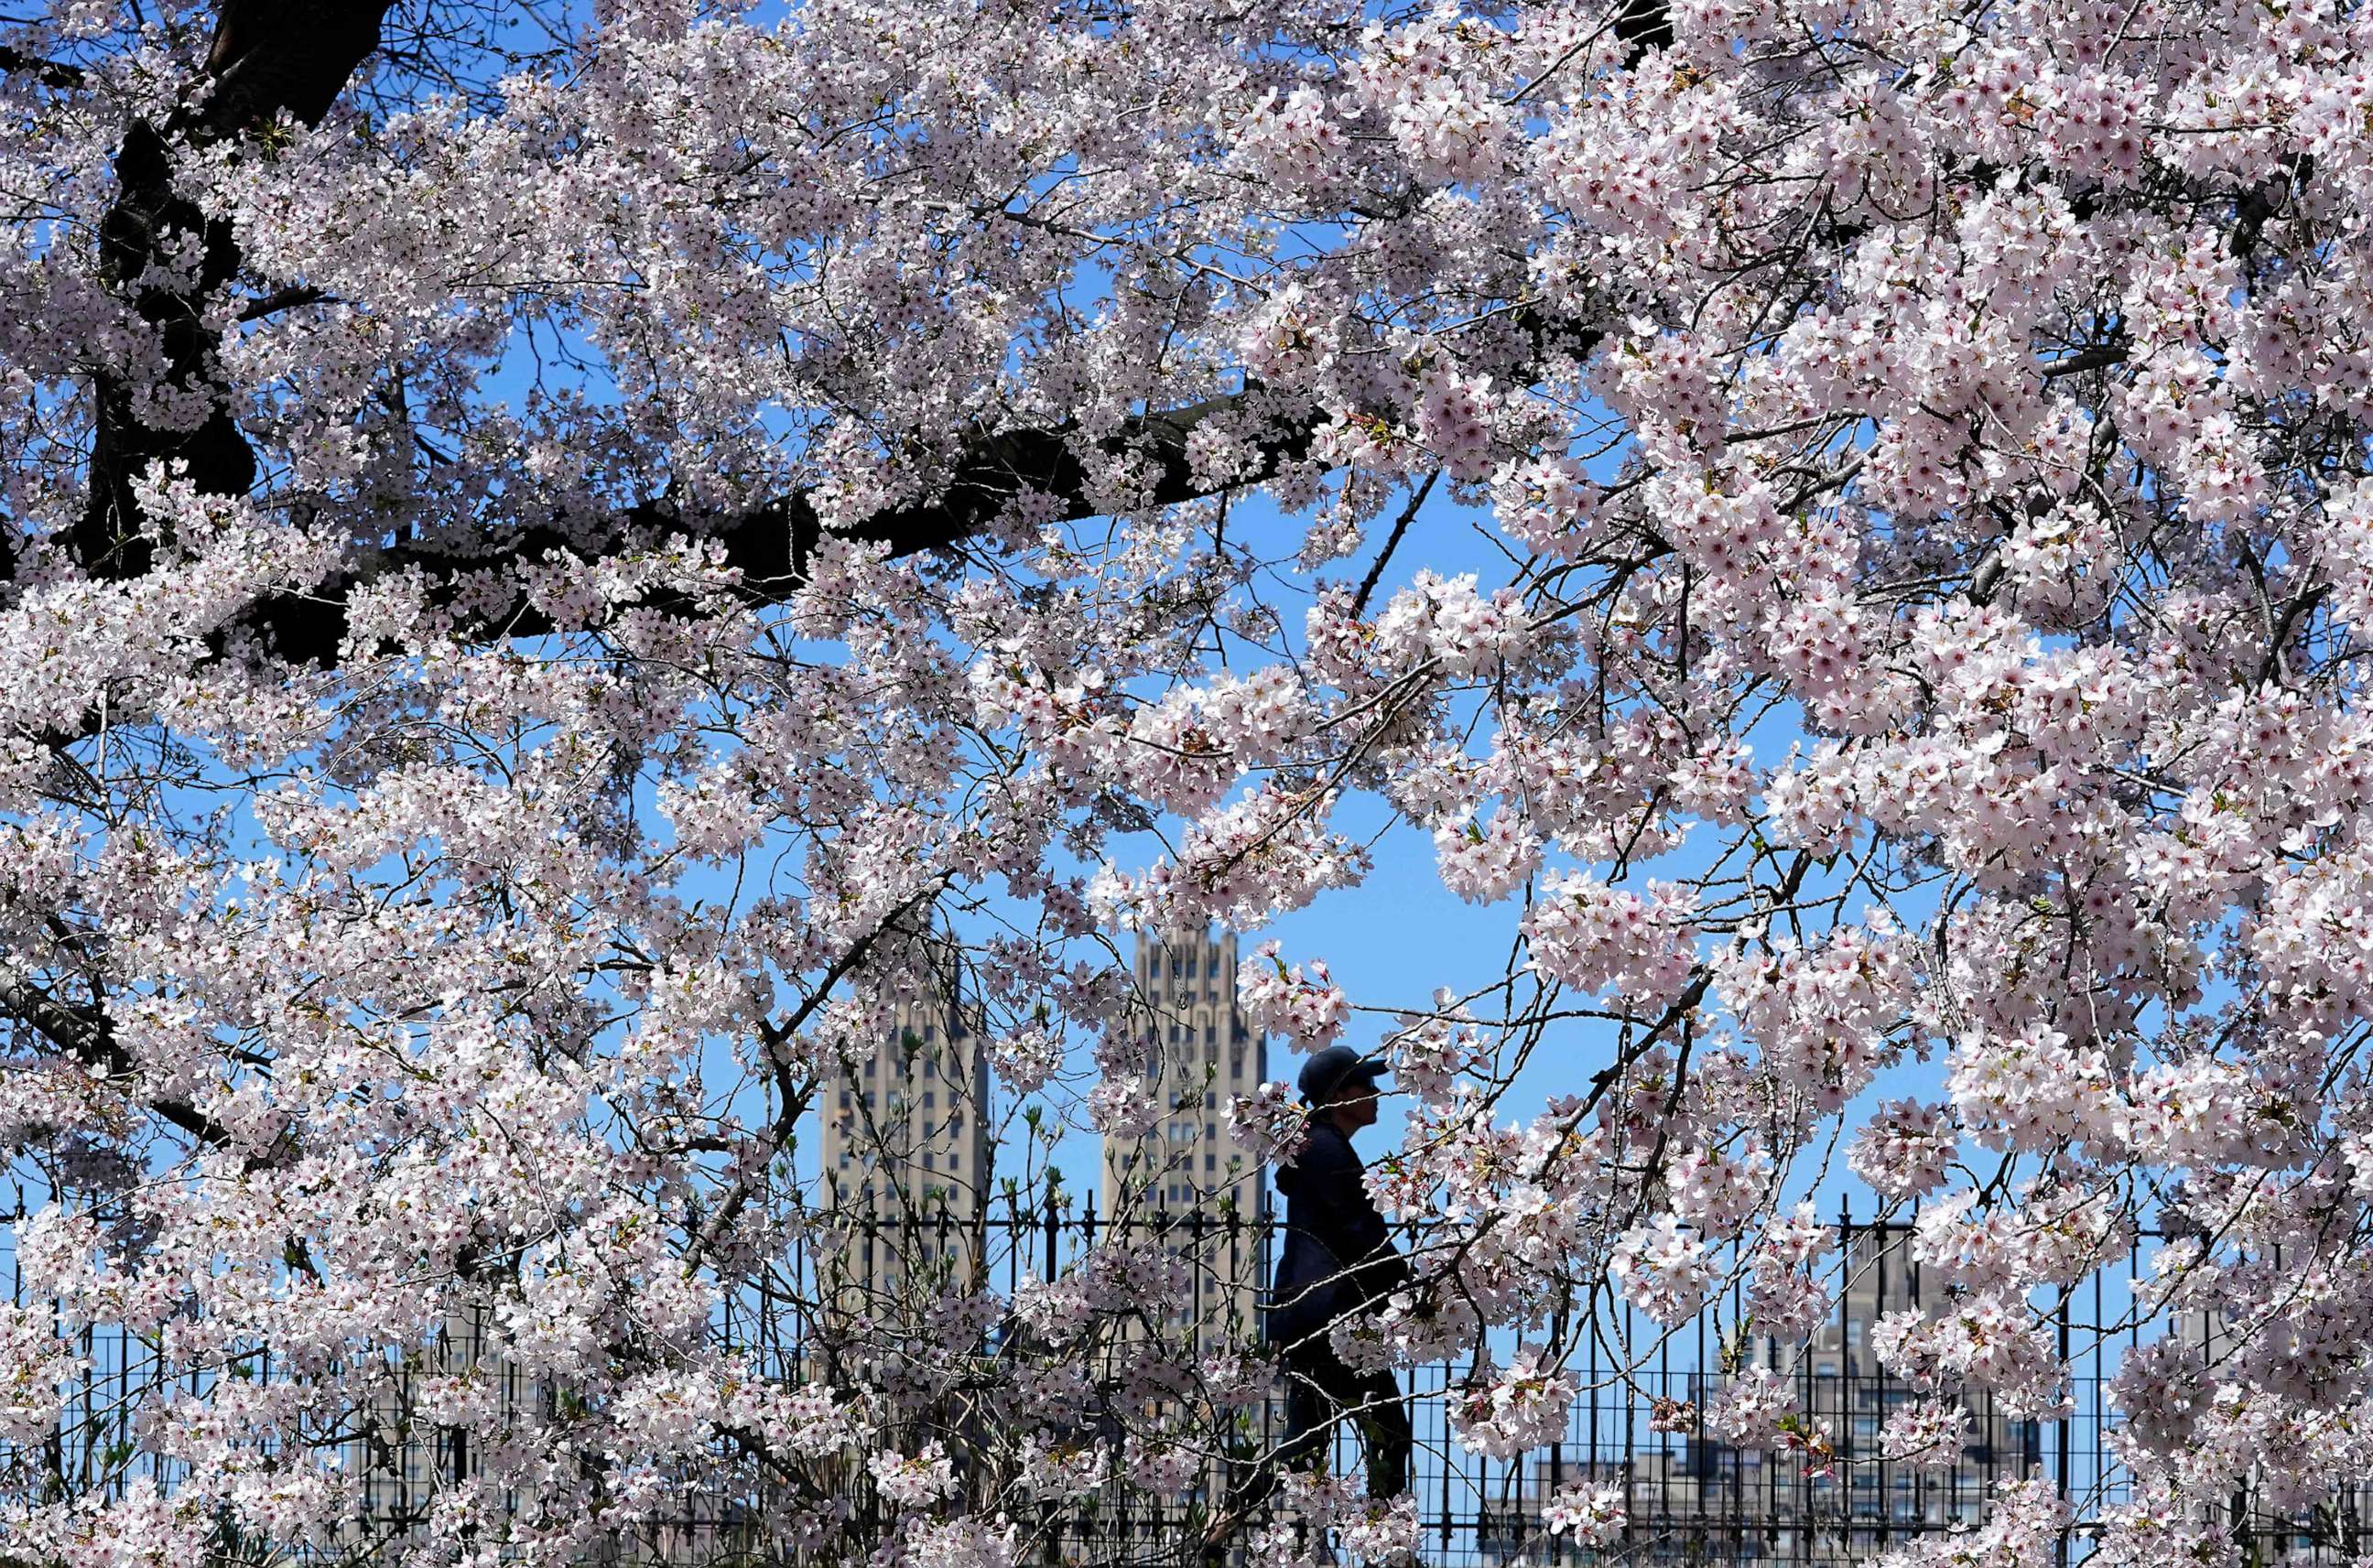 PHOTO: A woman walks past Cherry blossoms in bloom around the Jacqueline Kennedy Onassis Reservoir in Central Park, New York, April 10, 2023.